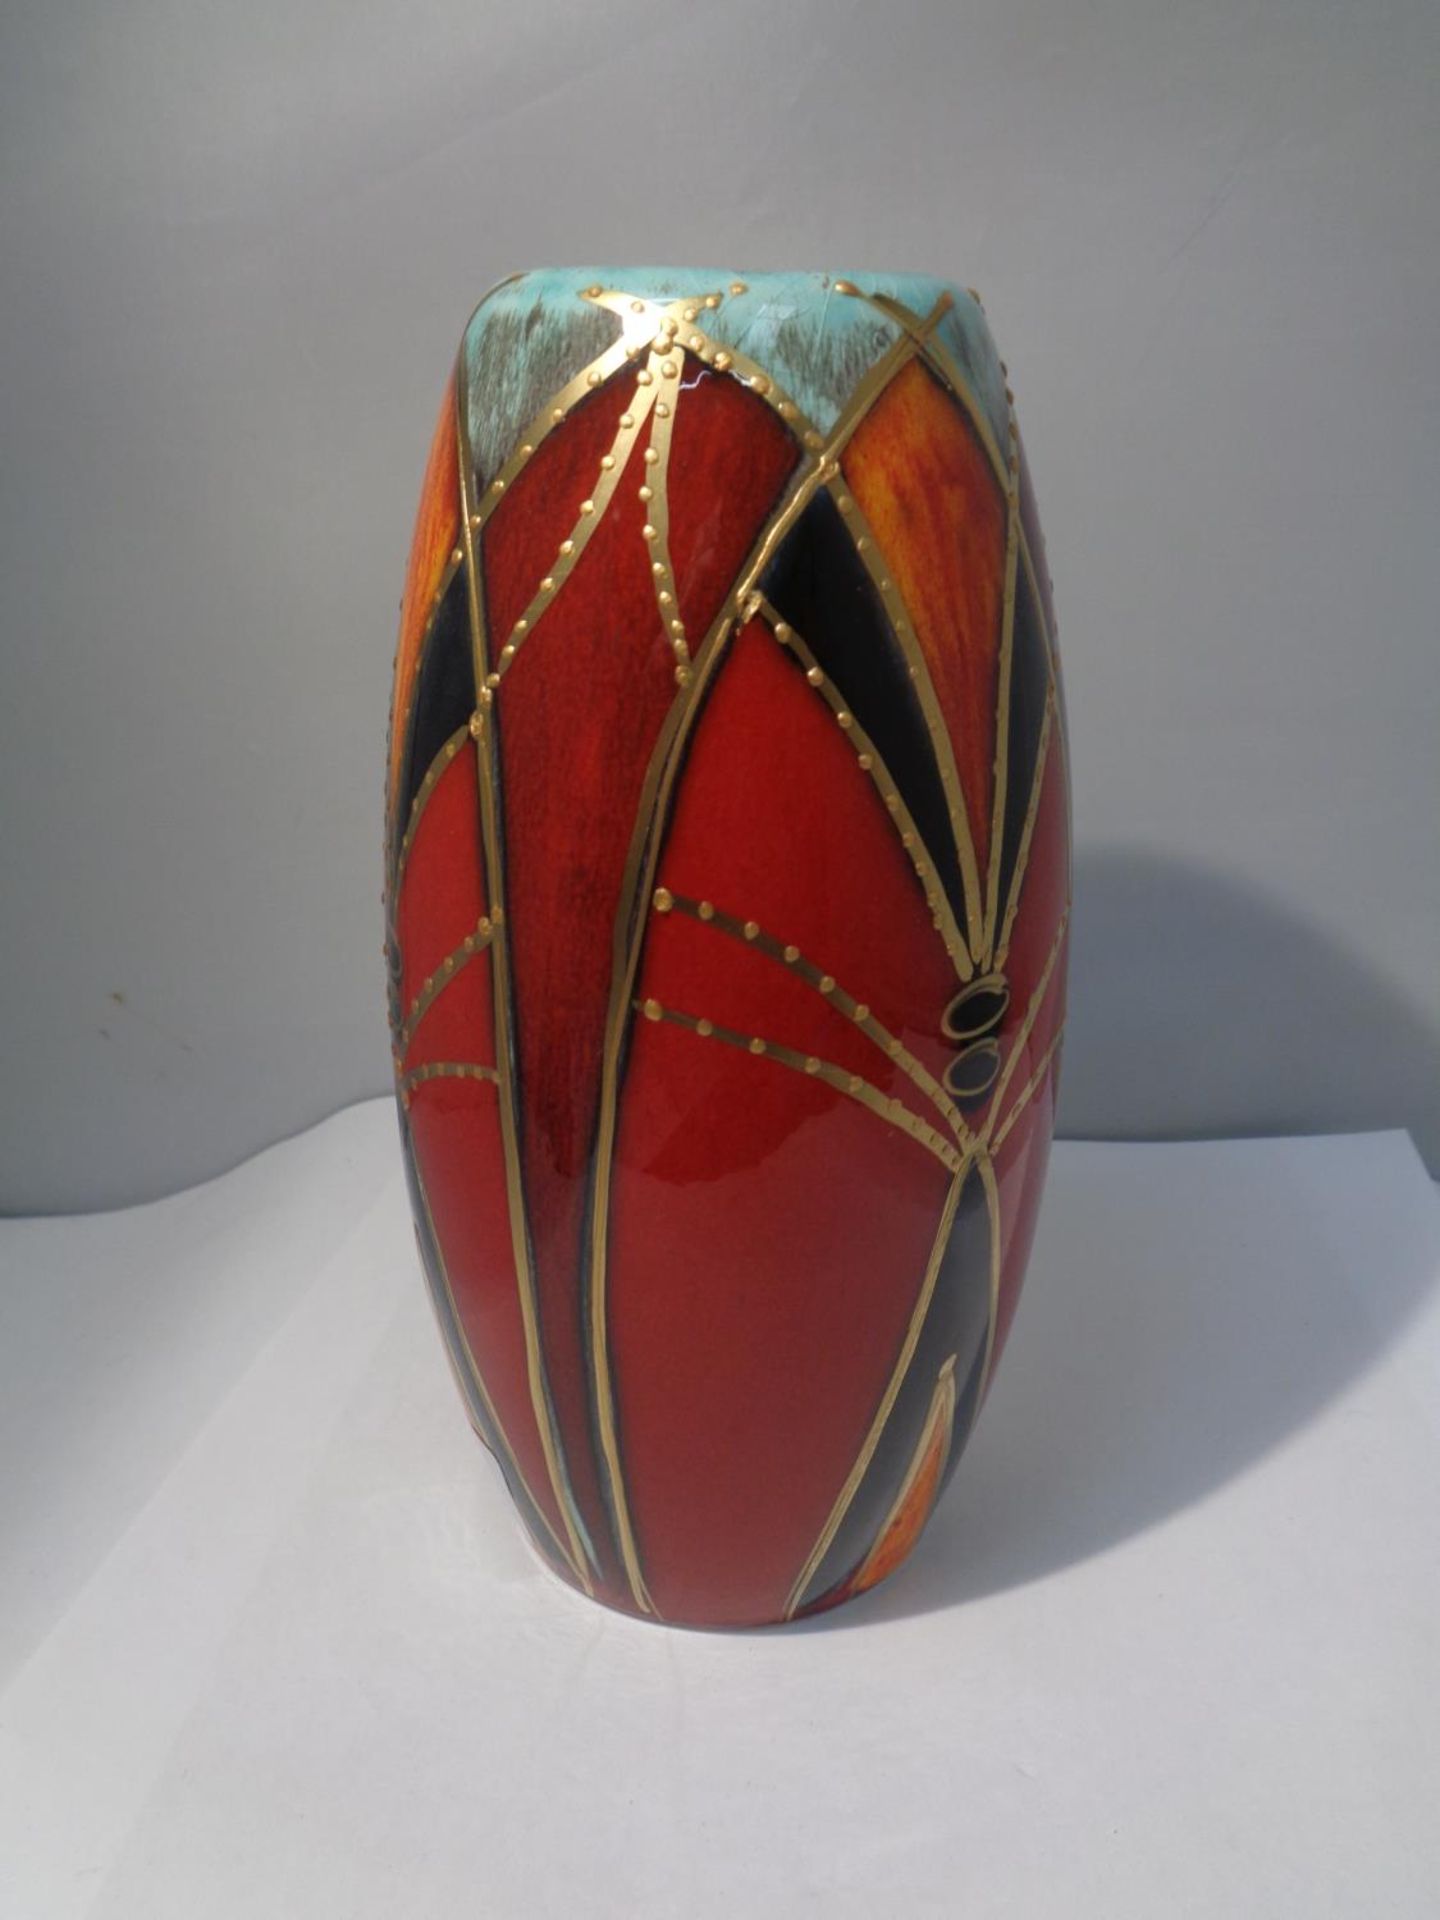 AN ANITA HARRIS HAND PAINTED GOTHIC ARCHES VASE SIGNED IN GOLD